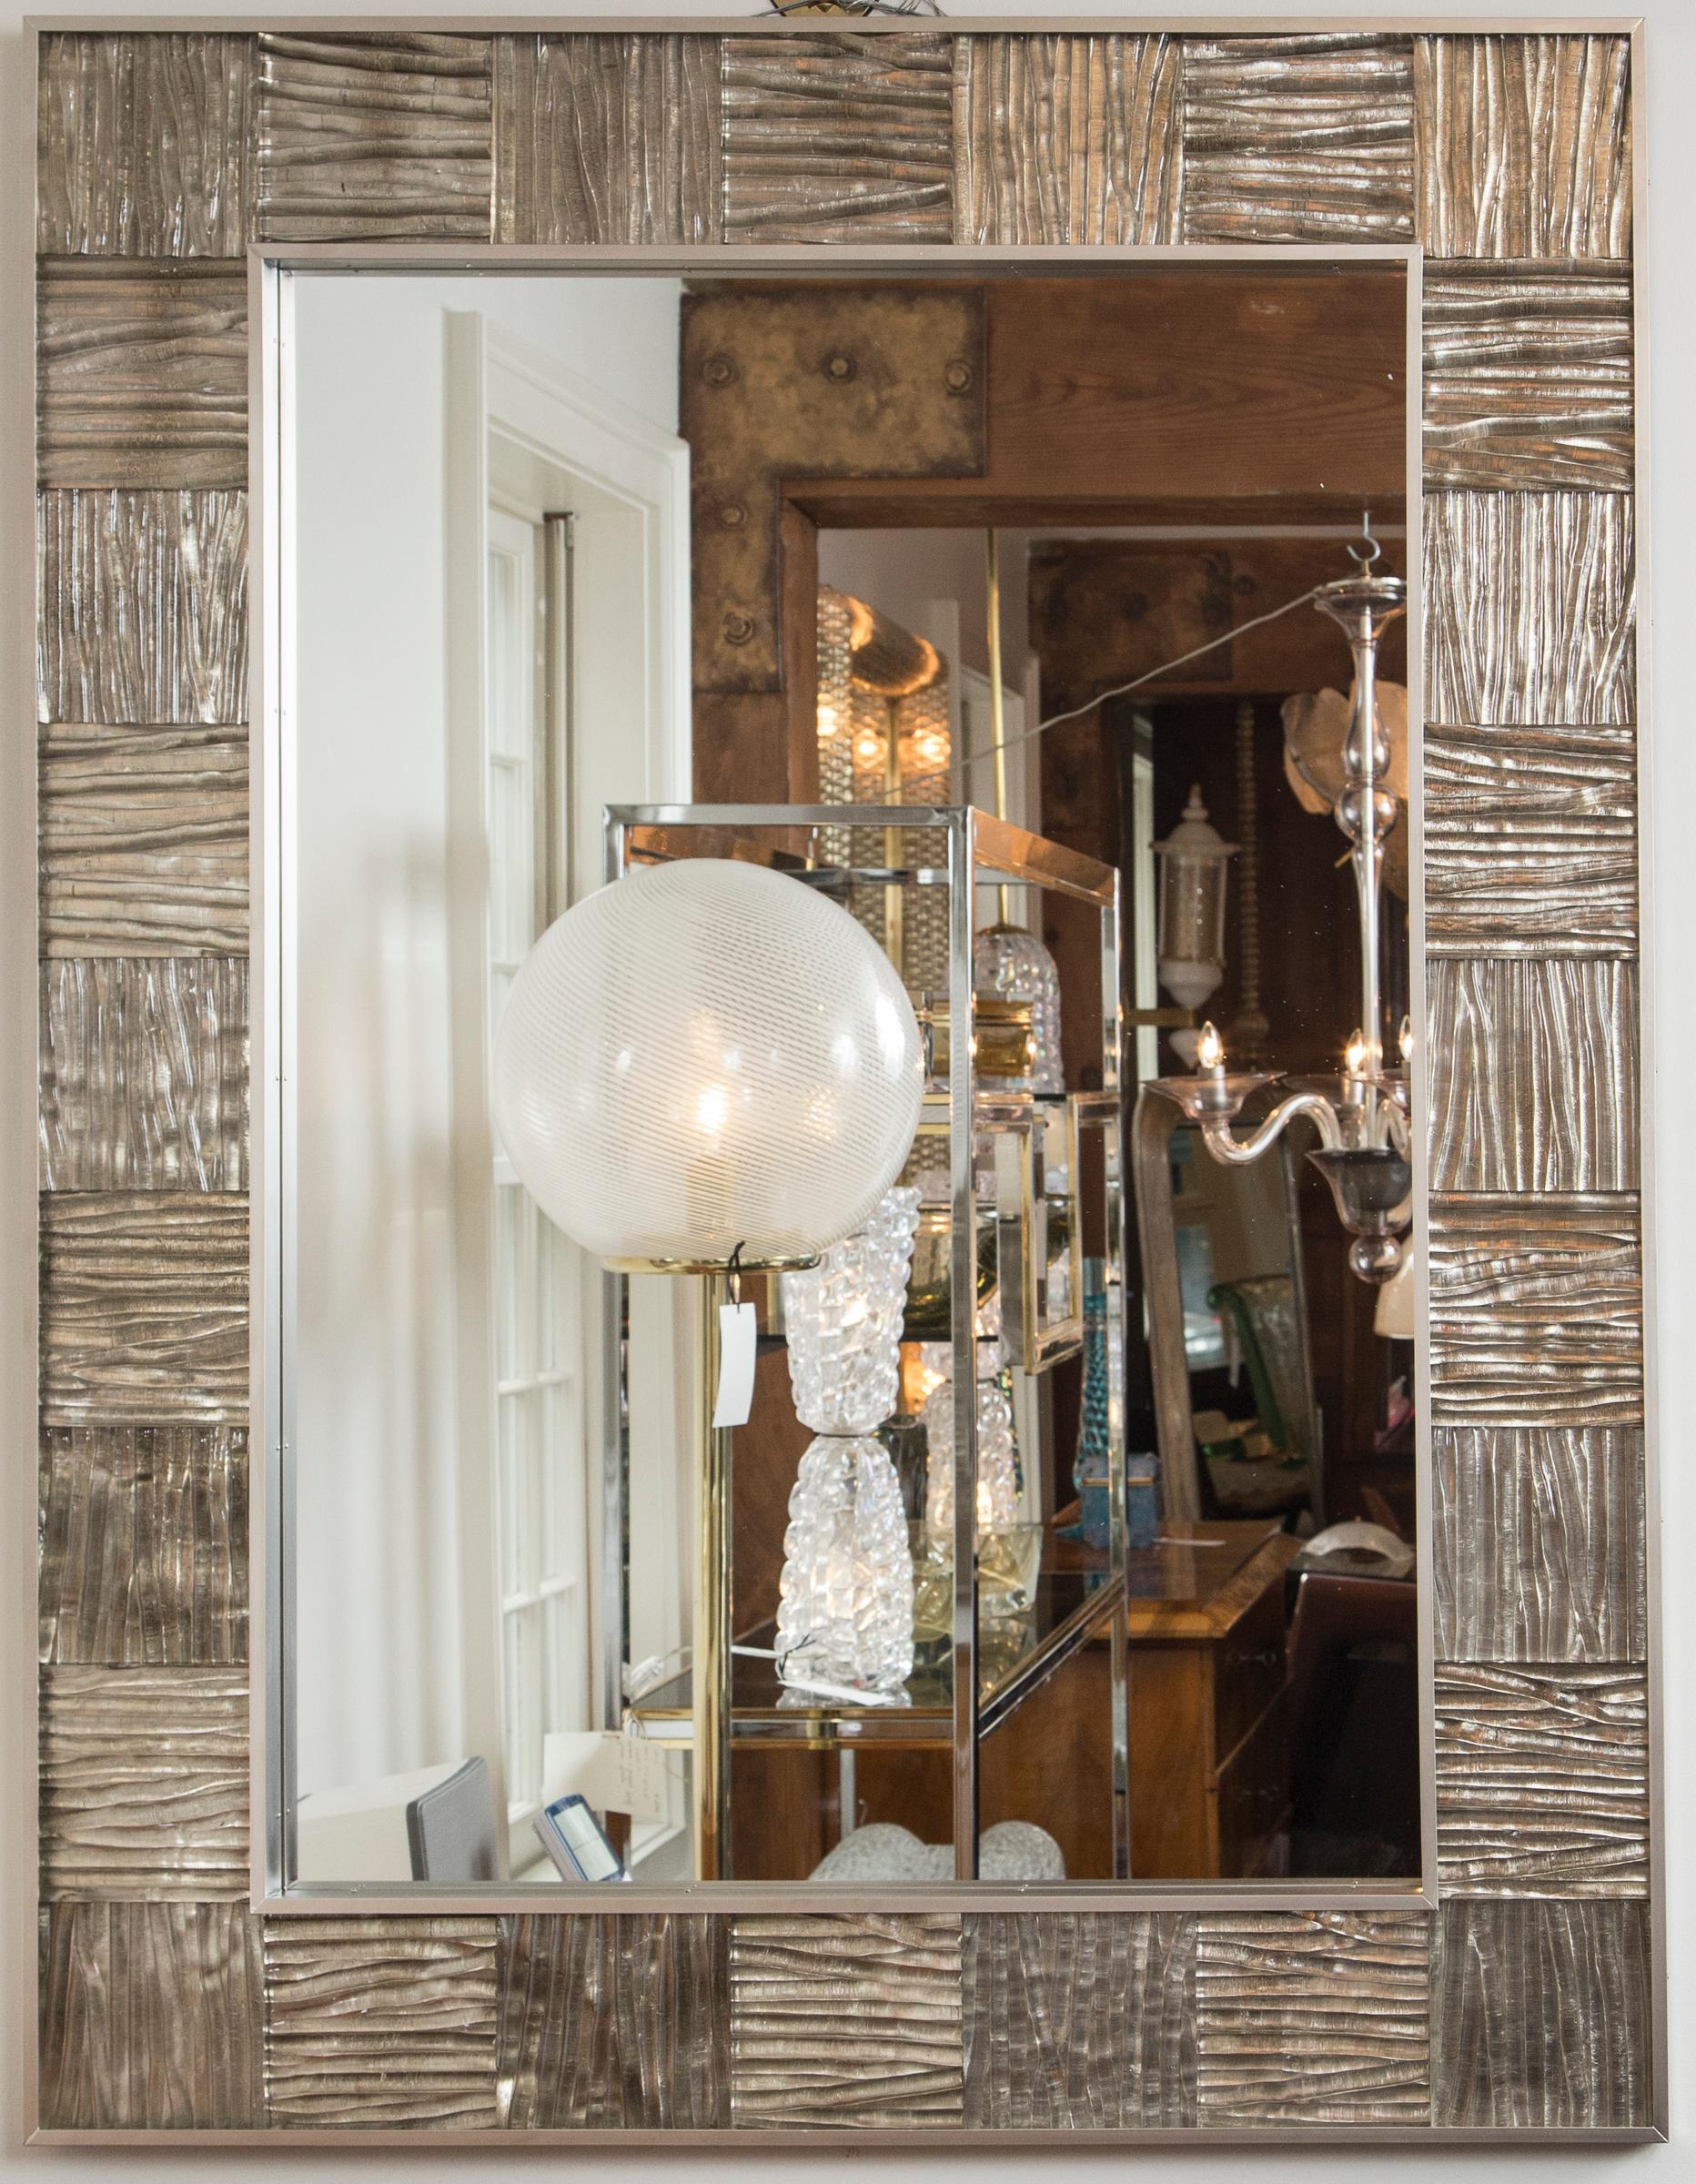 Striking matte nickel on brass framed mirror inset with thickly blown wavy textured glass panels in a clear color and finished with a champagne gilt backing, artisan metal and glass work. Weight 100 lbs
Date: Contemporary
Origin: Italy
Condition: